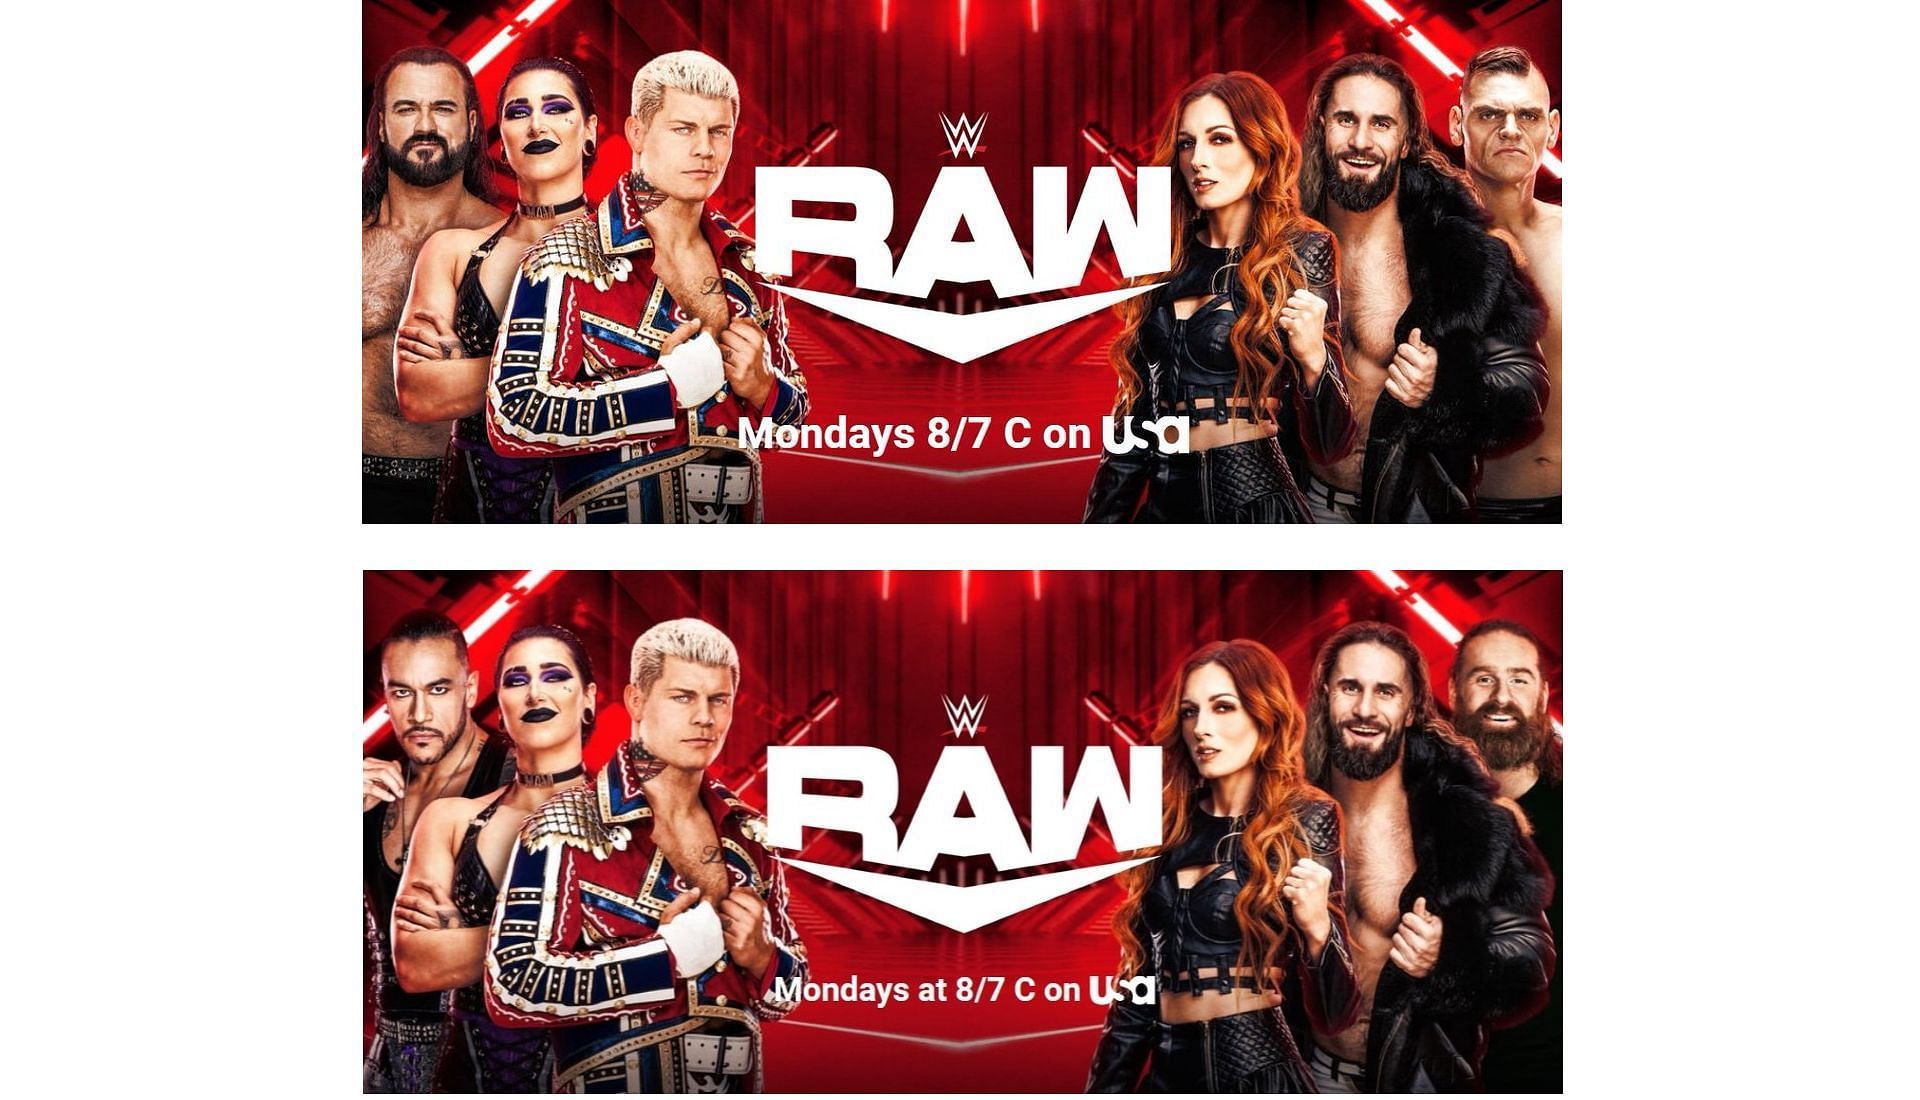 The updated WWE RAW banner without Drew McIntyre and Gunther